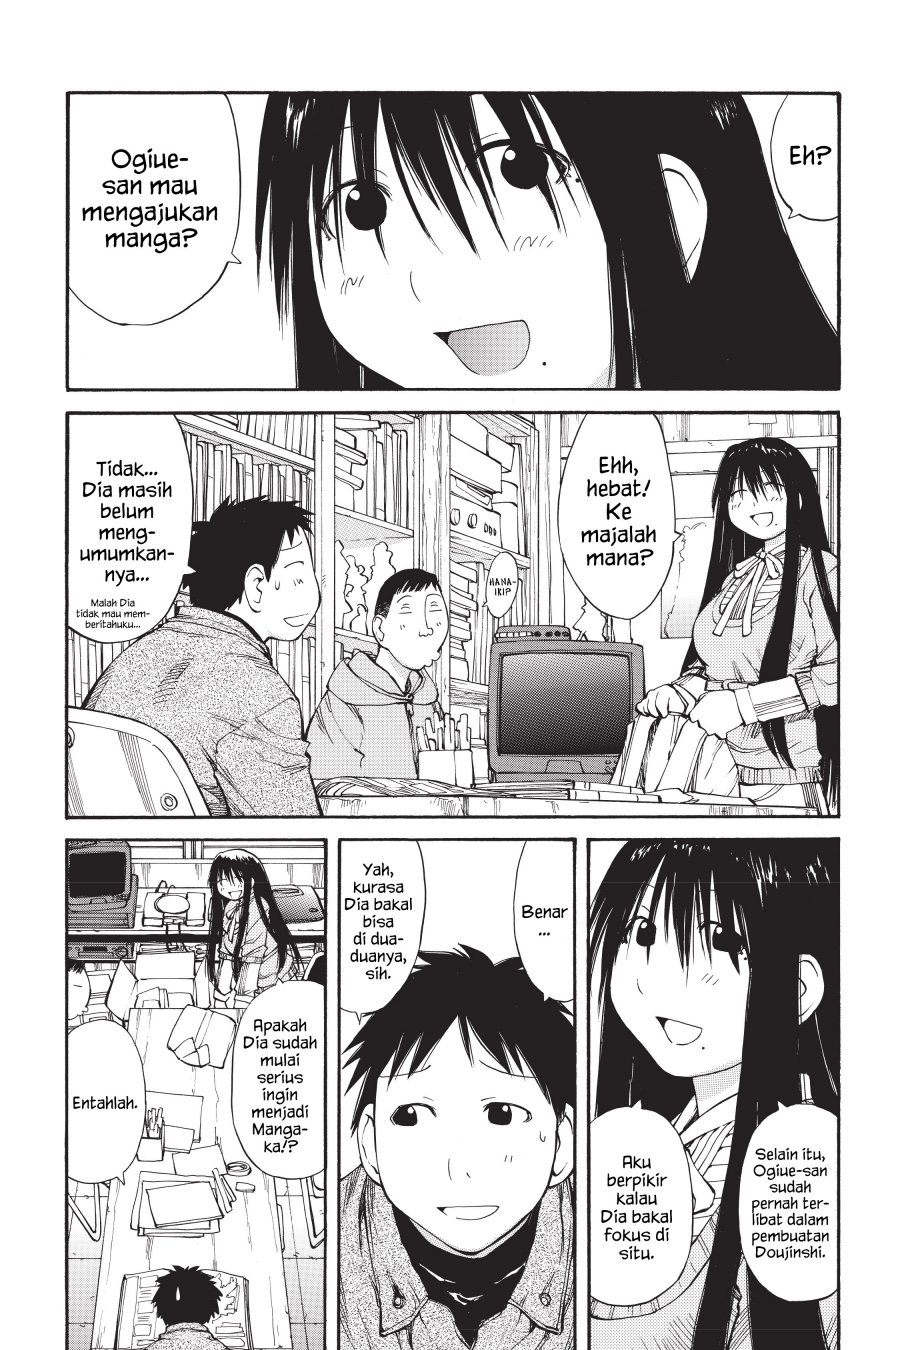 Genshiken – The Society for the Study of Modern Visual Culture Chapter 52 Image 2